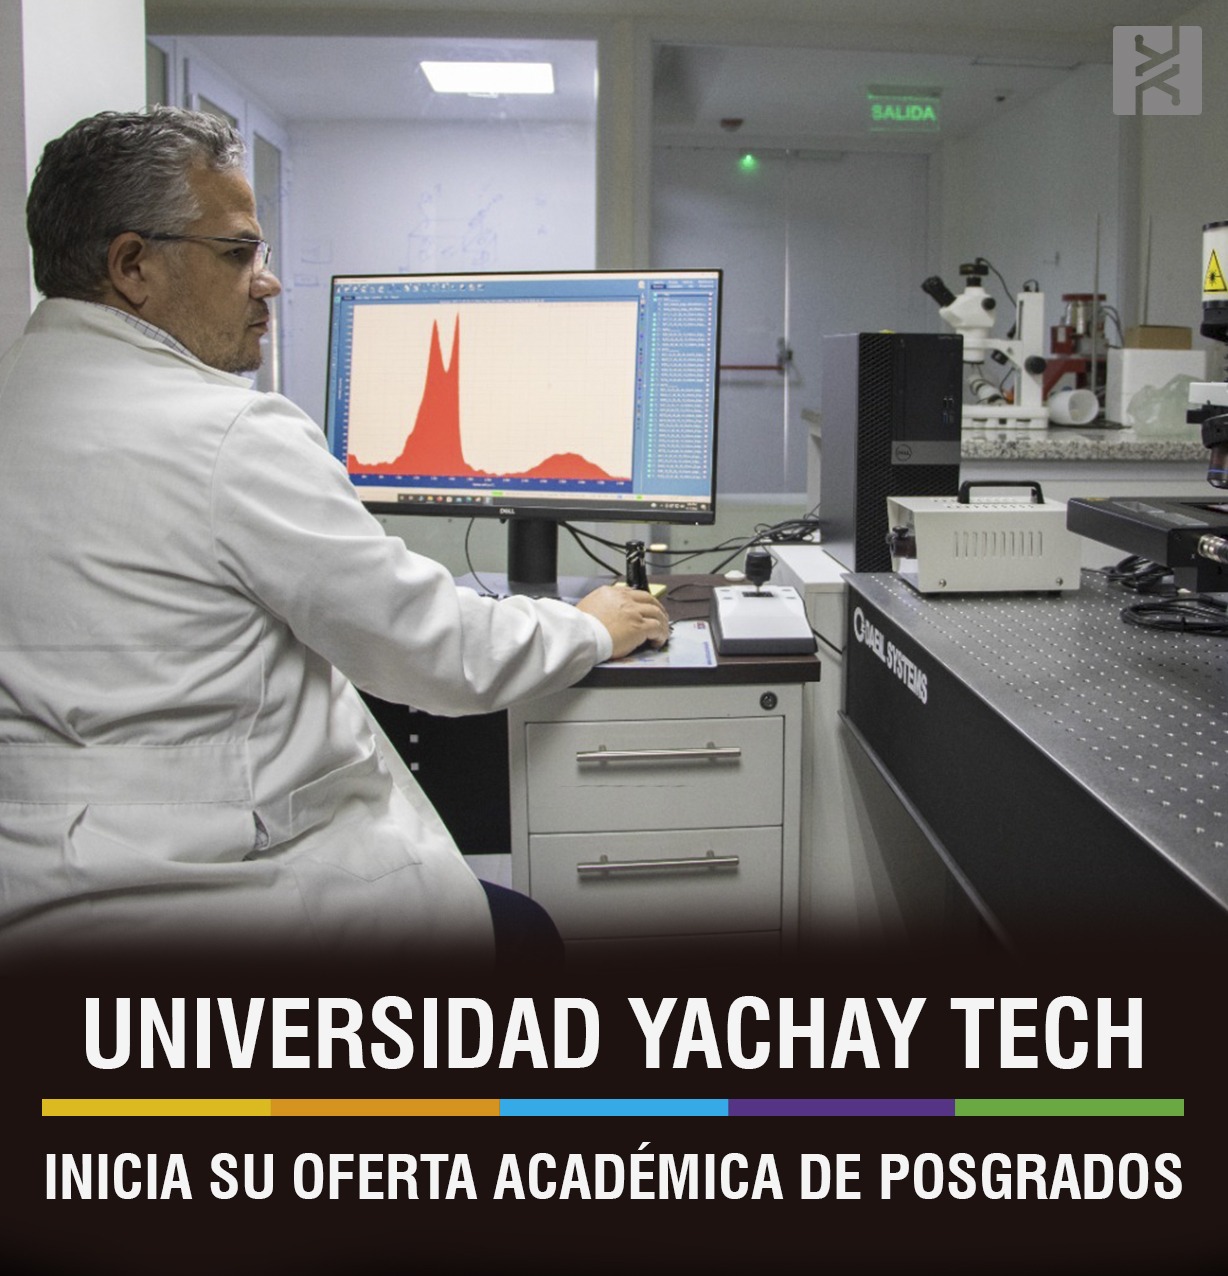 YACHAY TECH UNIVERSITY LAUNCHES ITS ACADEMIC OFFER FOR GRADUATE PROGRAMS